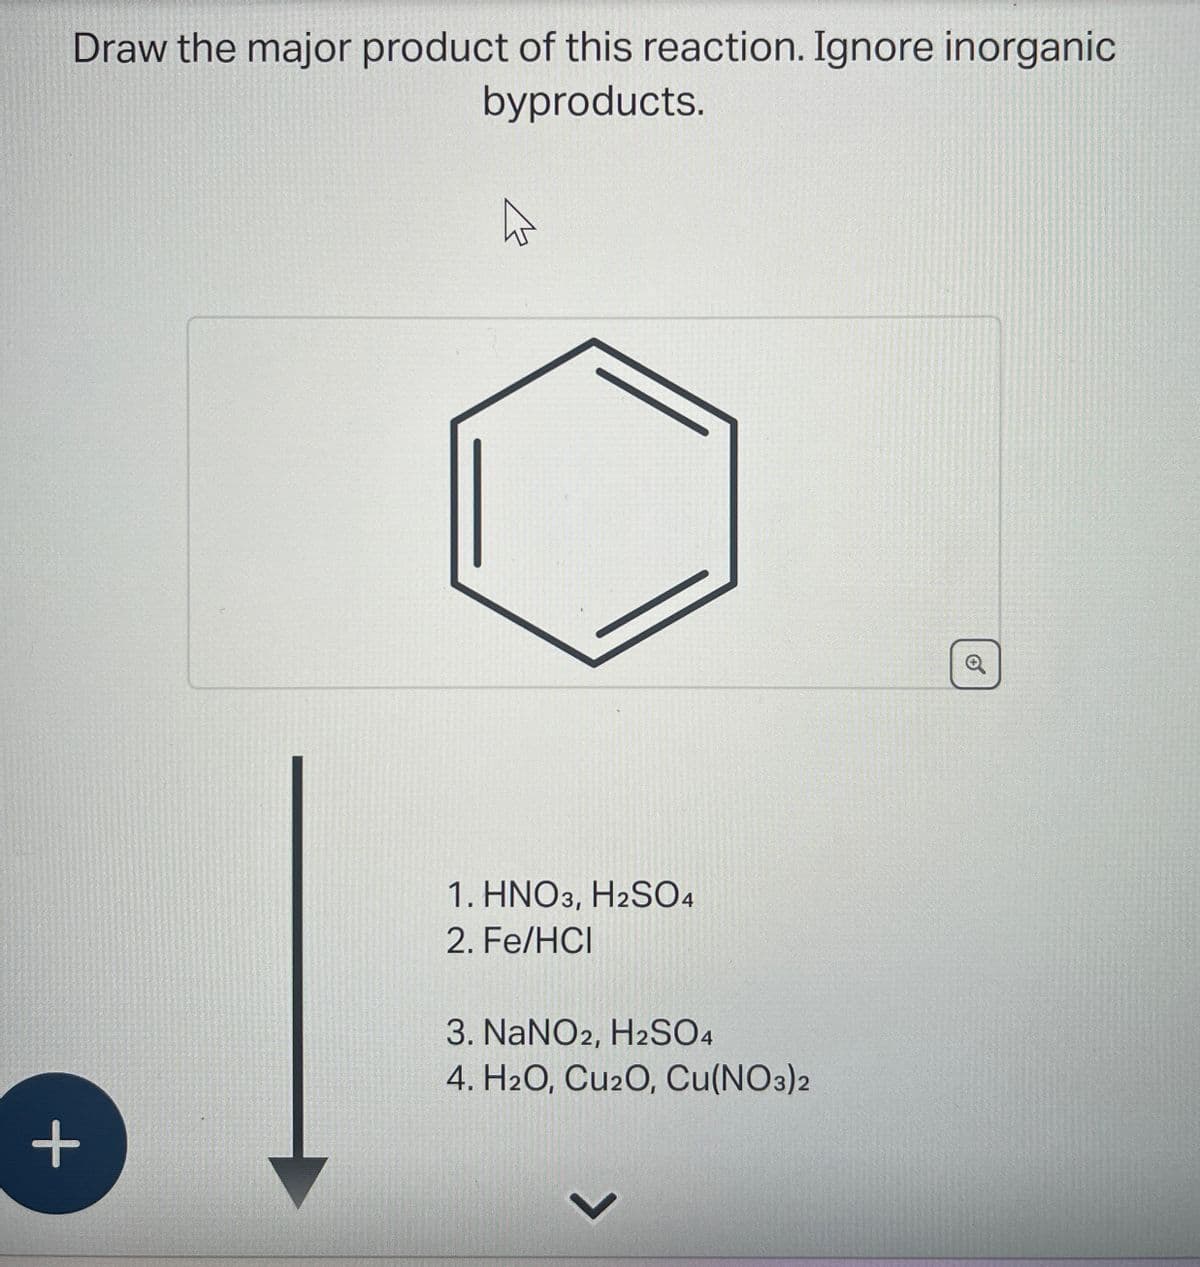 Draw the major product of this reaction. Ignore inorganic
byproducts.
+
O'
1. HNO3, H2SO4
2. Fe/HCI
3. NaNO2, H2SO4
4. H2O, Cu2O, Cu(NO3)2
L